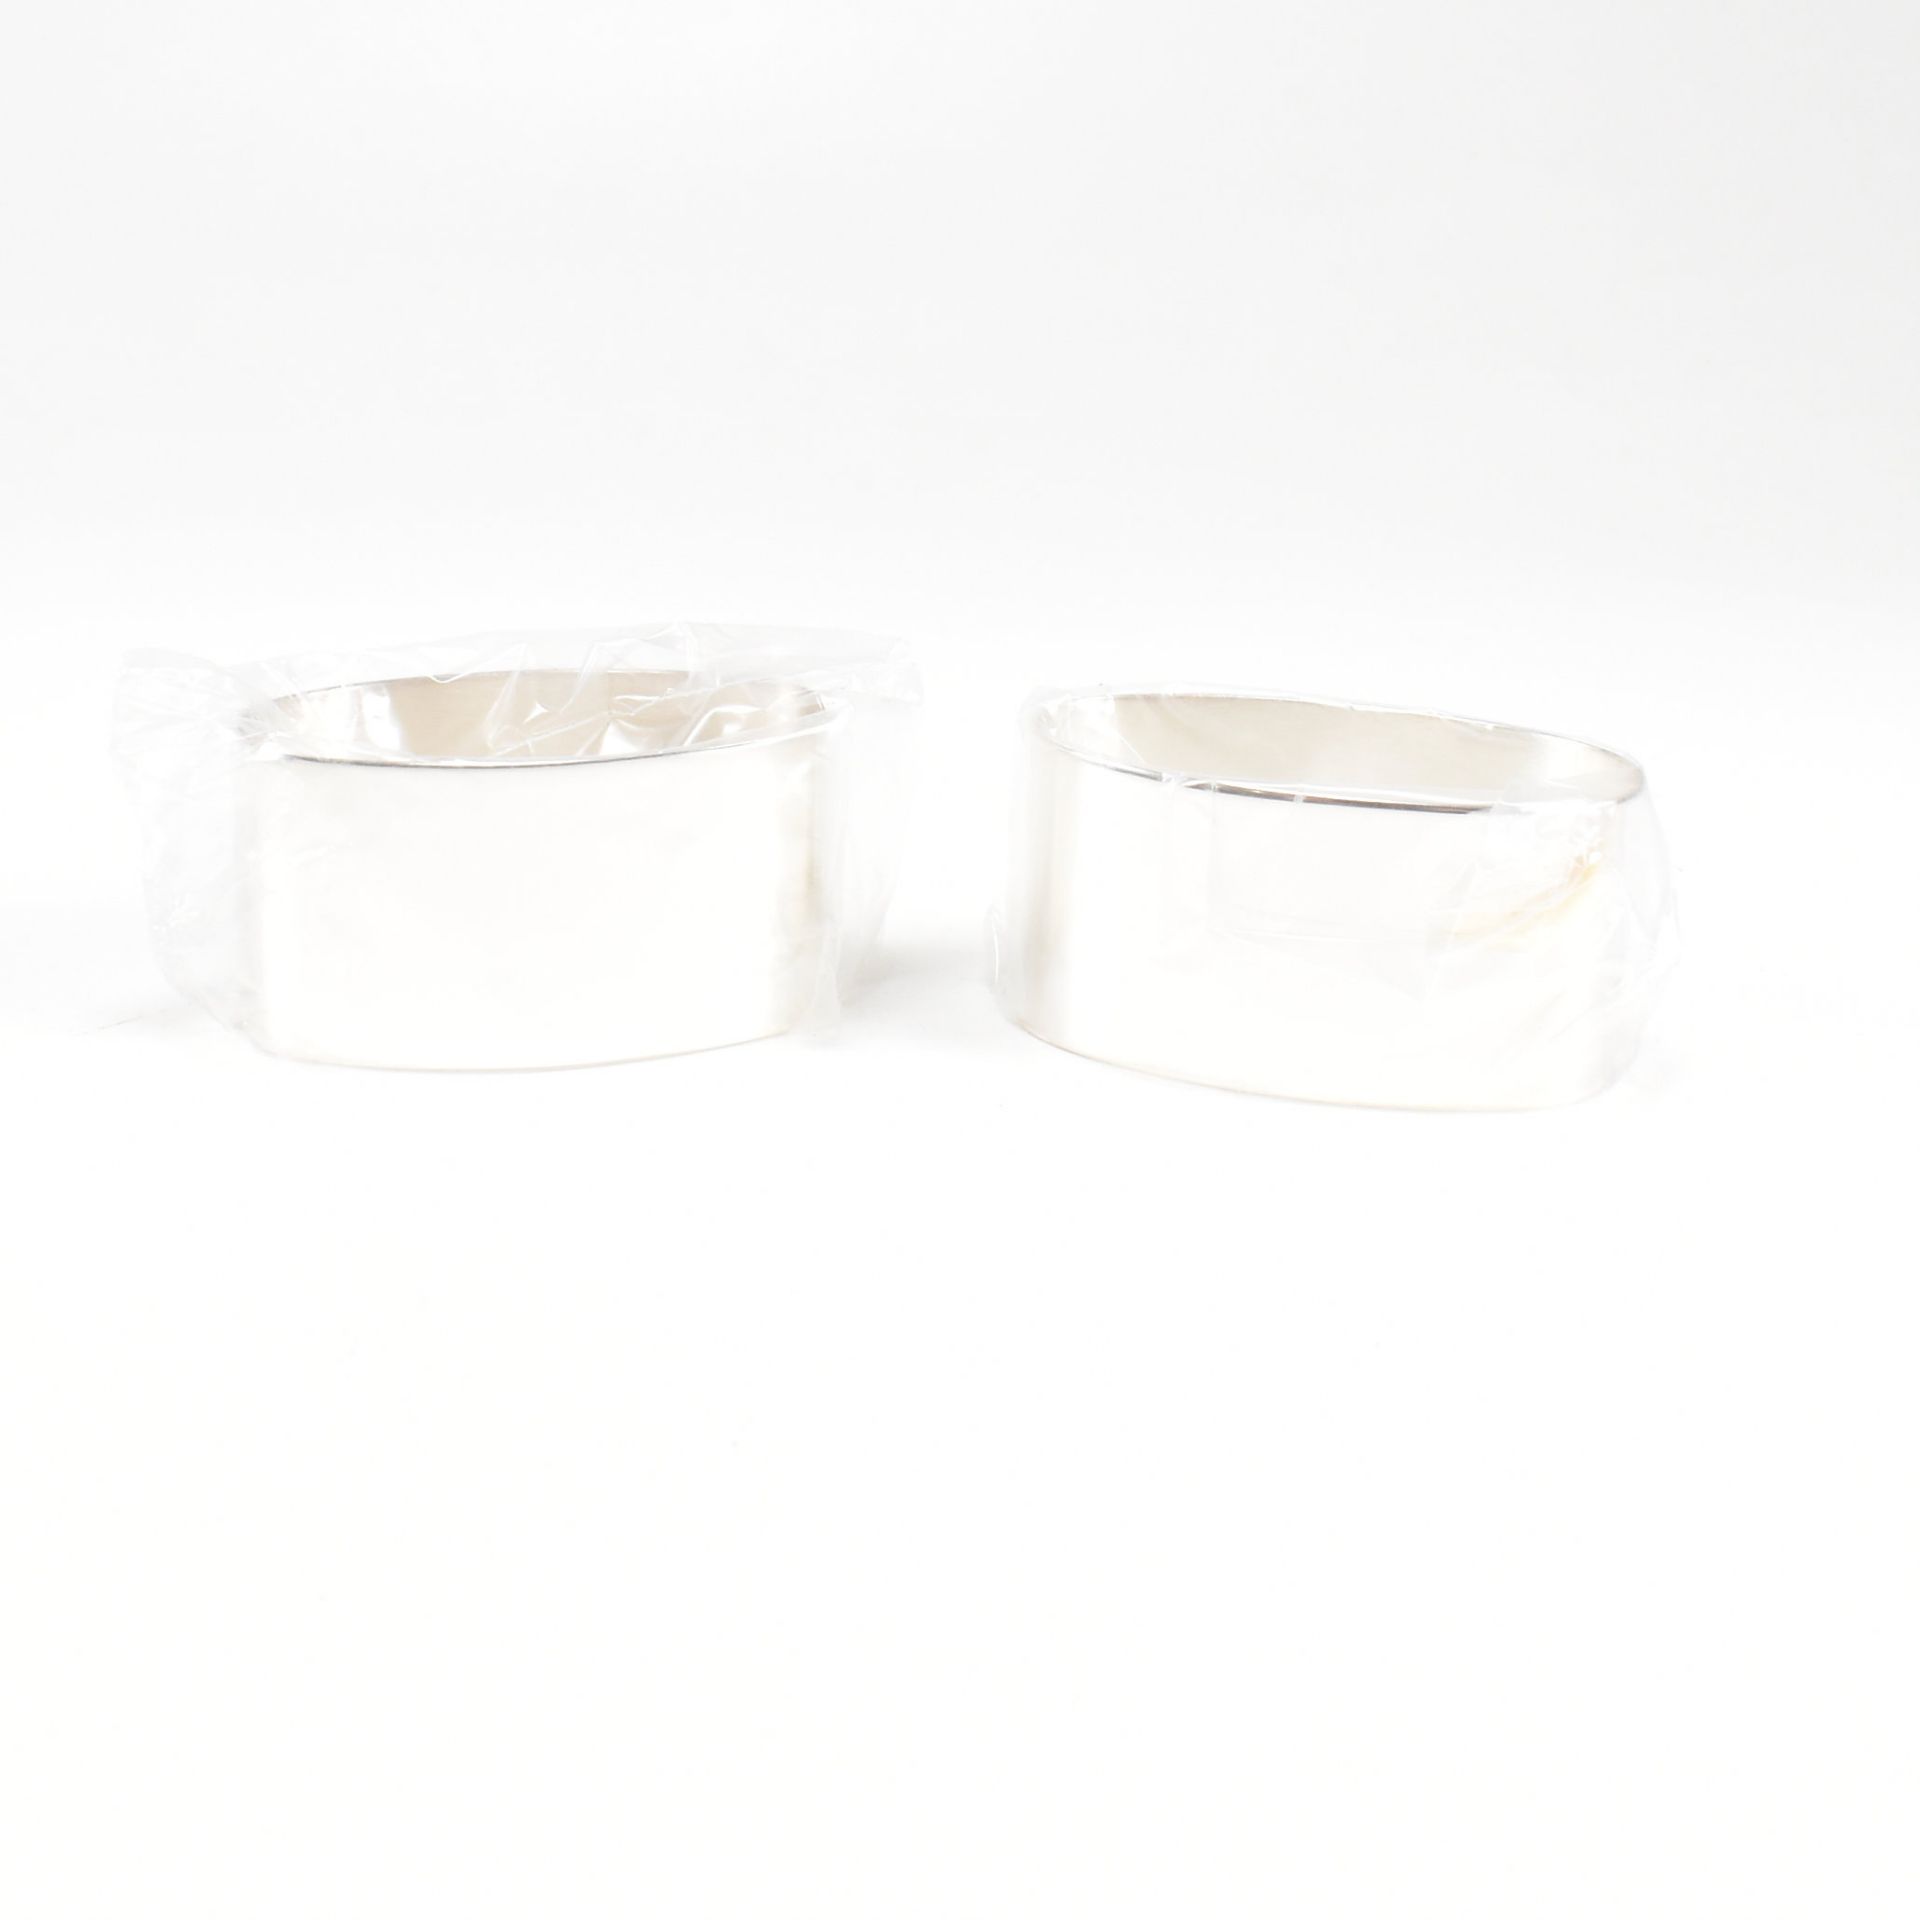 1990S CASED PAIR OF NAPKIN RINGS - Image 5 of 11